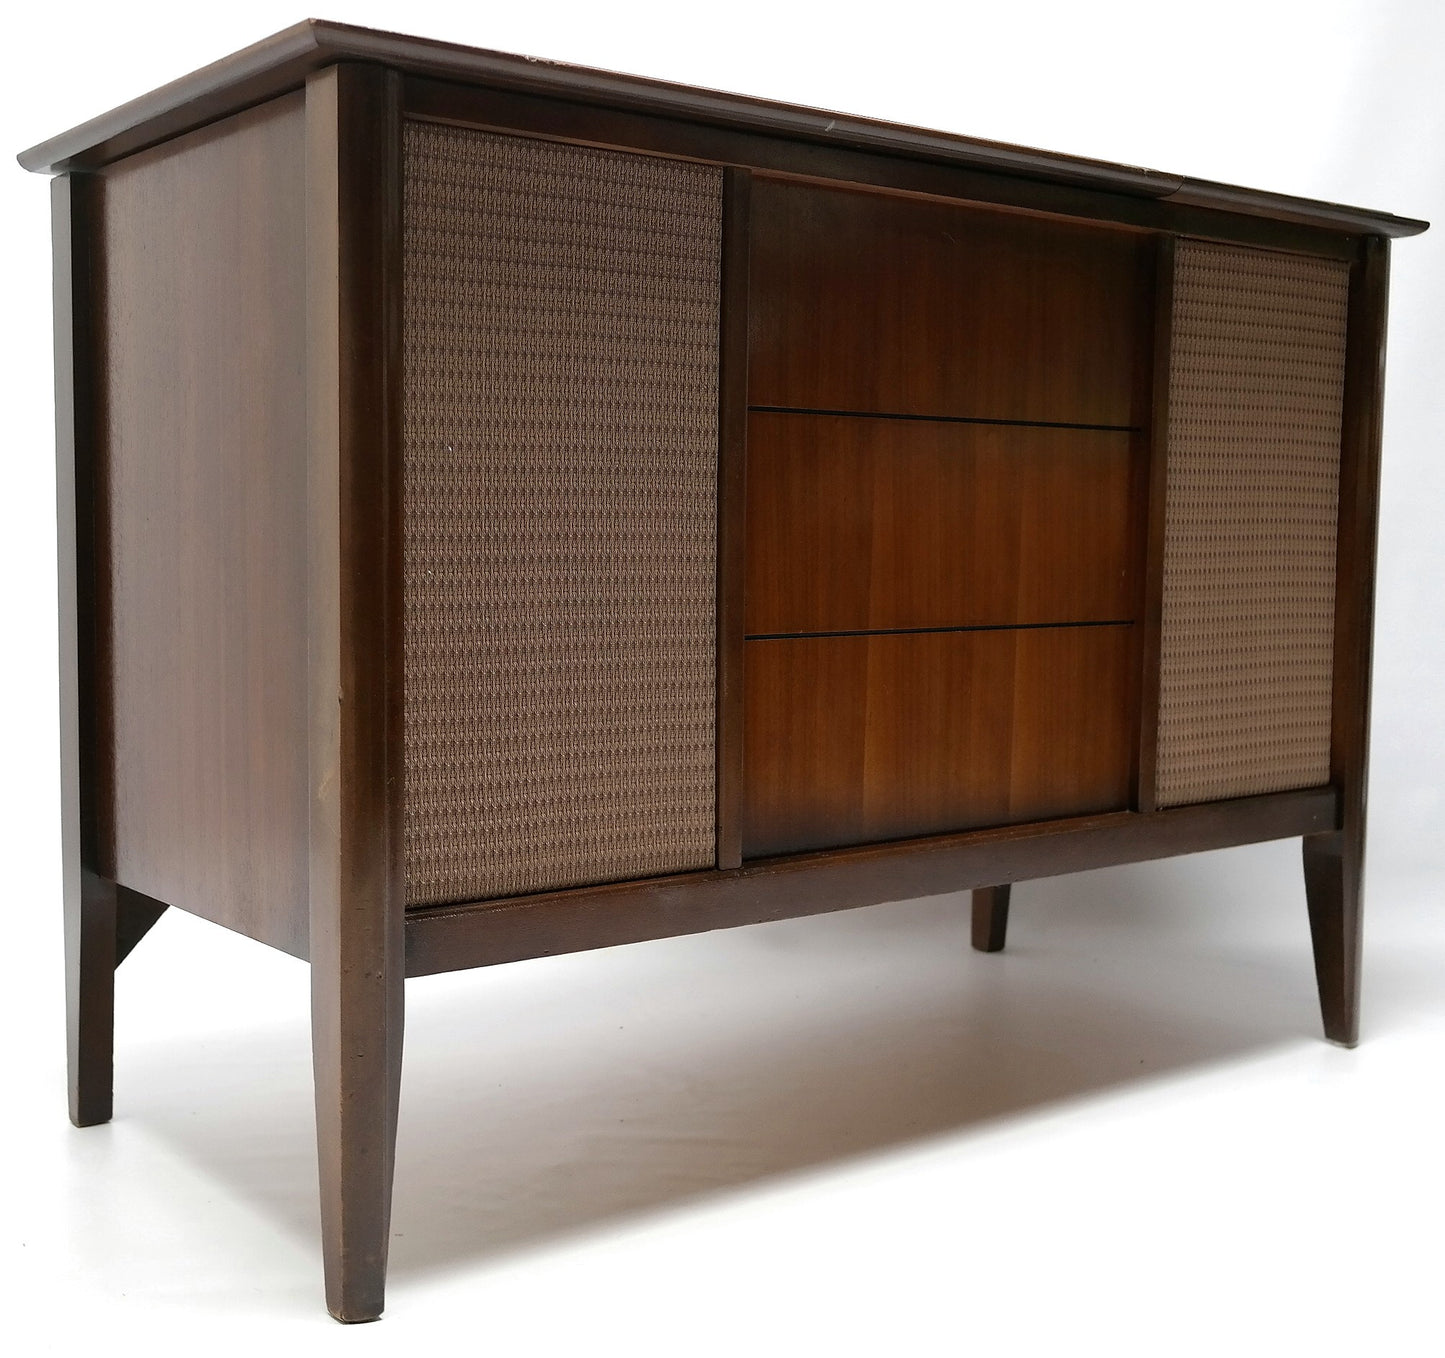 Zenith Mini Stereo Console Vintage Record Player with Record Changer - Bluetooth - Am / FM The Vintedge Co.